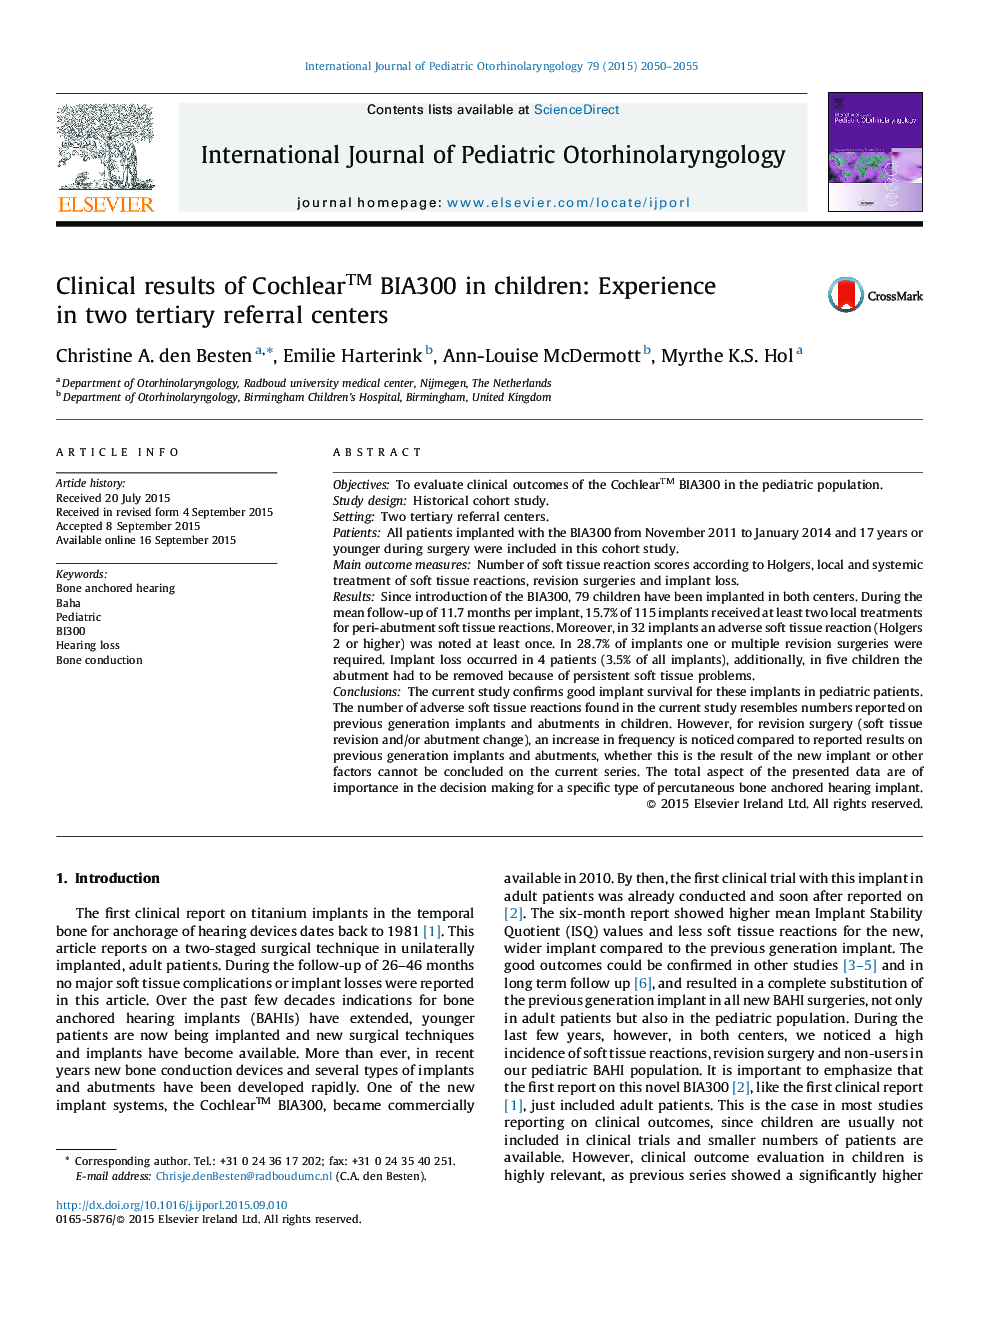 Clinical results of Cochlear™ BIA300 in children: Experience in two tertiary referral centers